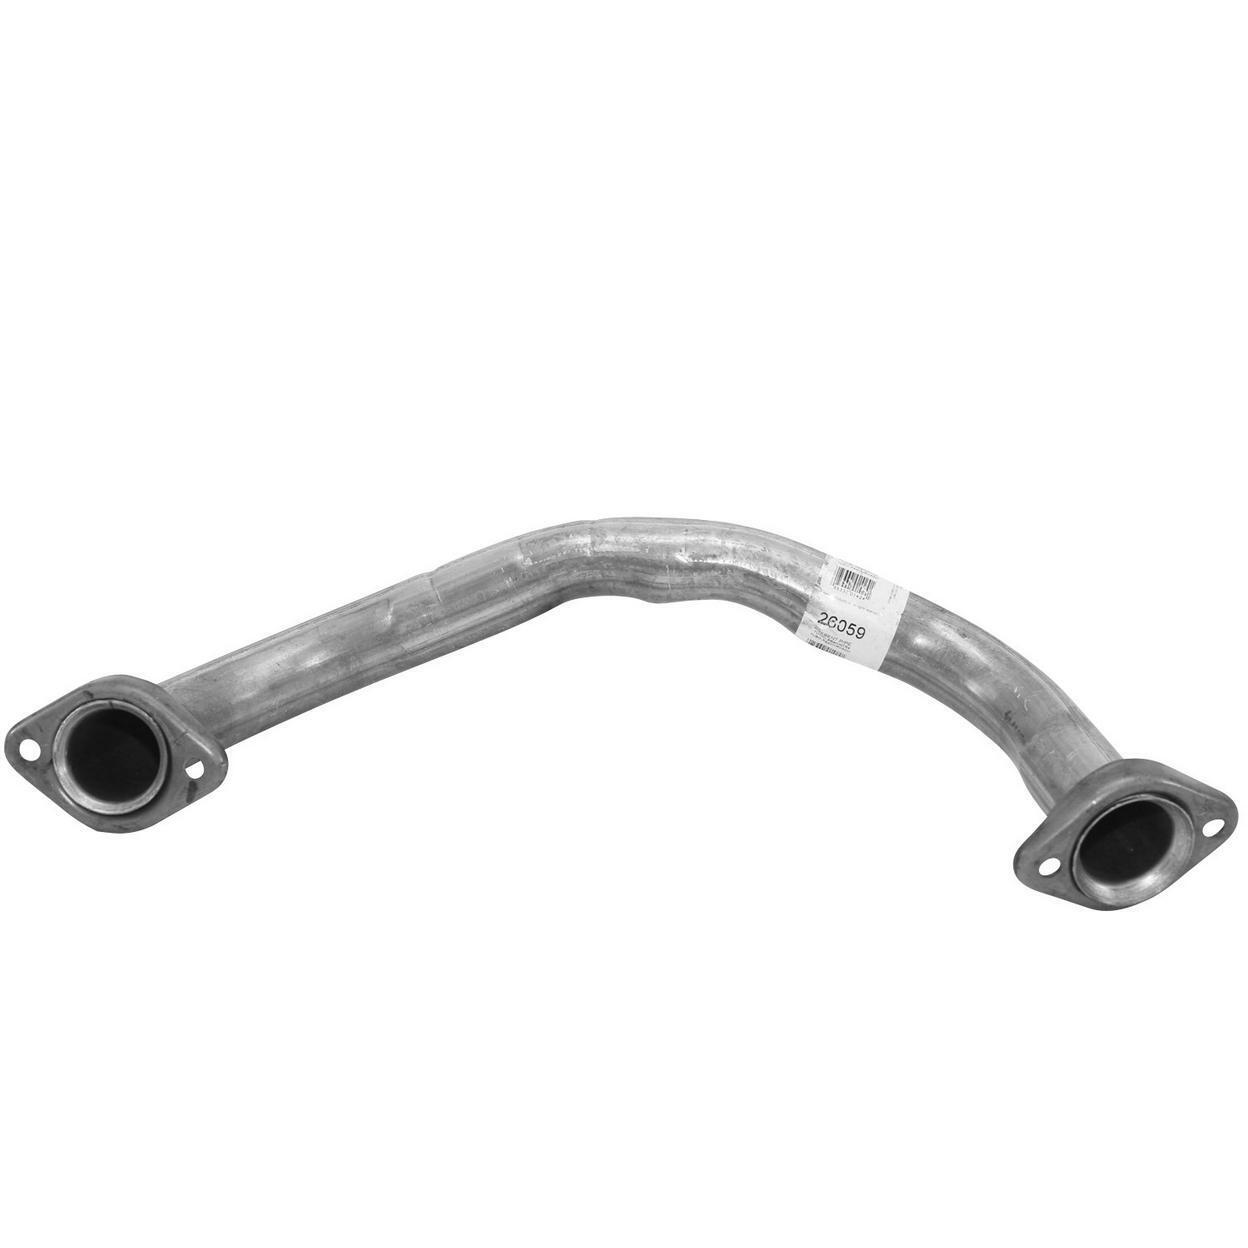 26059-LH Exhaust Pipe Fits 1986-1987 Oldsmobile Cutlass Supreme 5.0L V8 GAS OHV